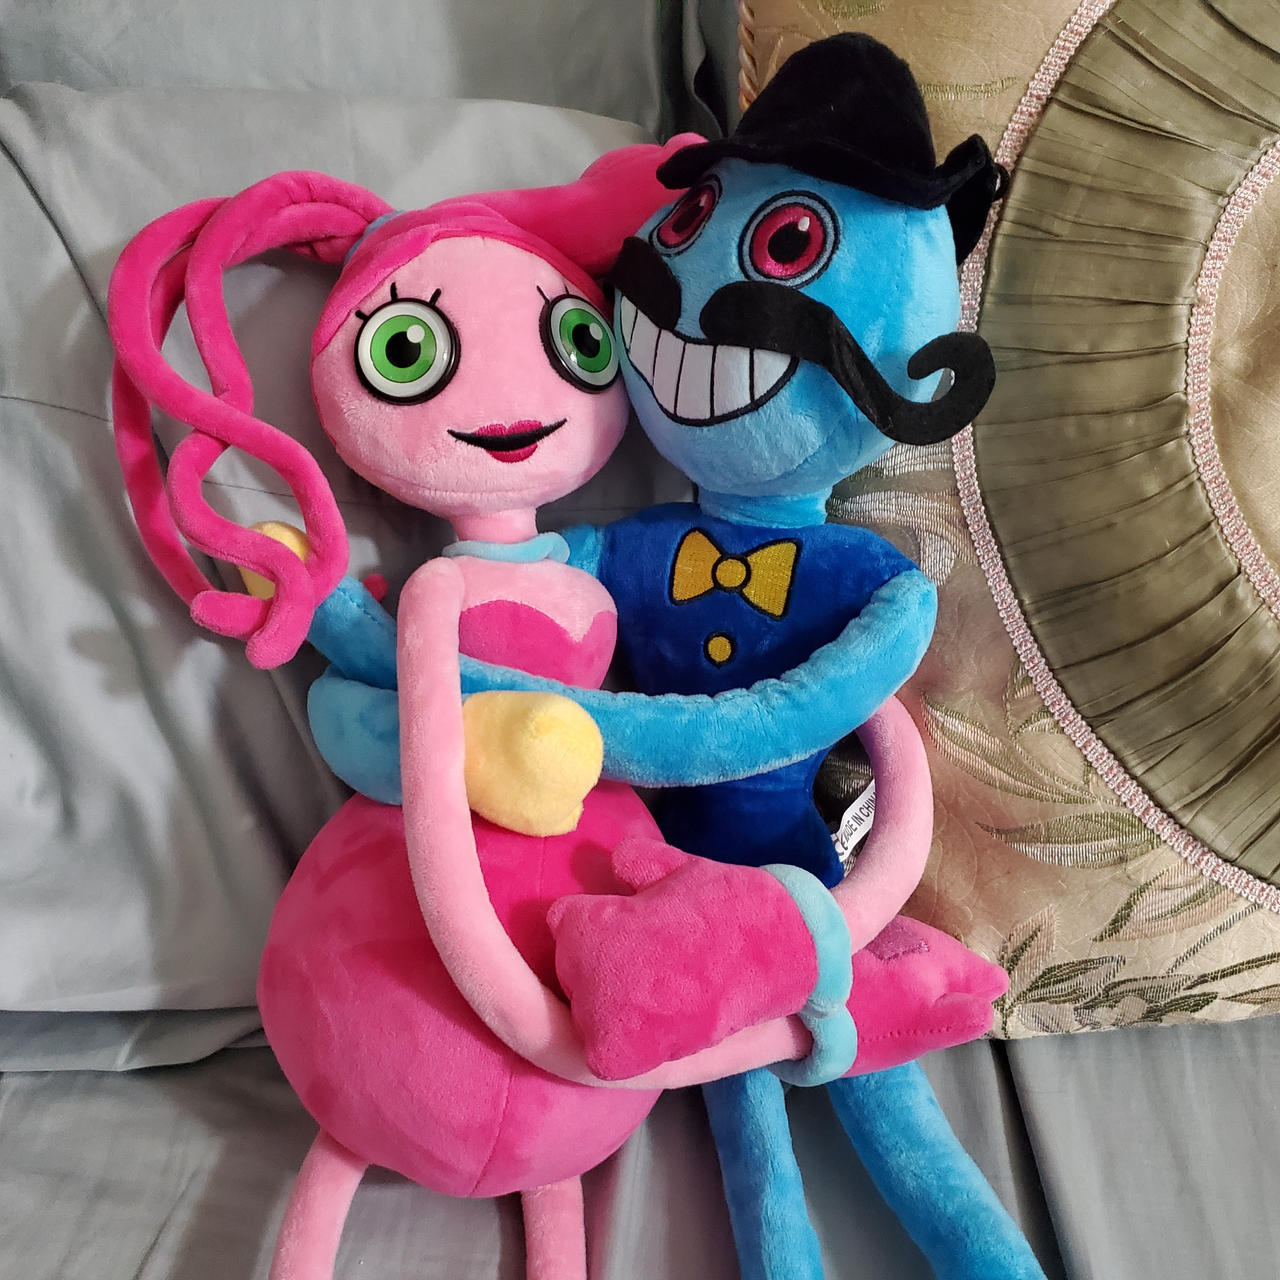 Mommy Long Legs and Family Plush Doll set photo 1 by BerryViolet on  DeviantArt